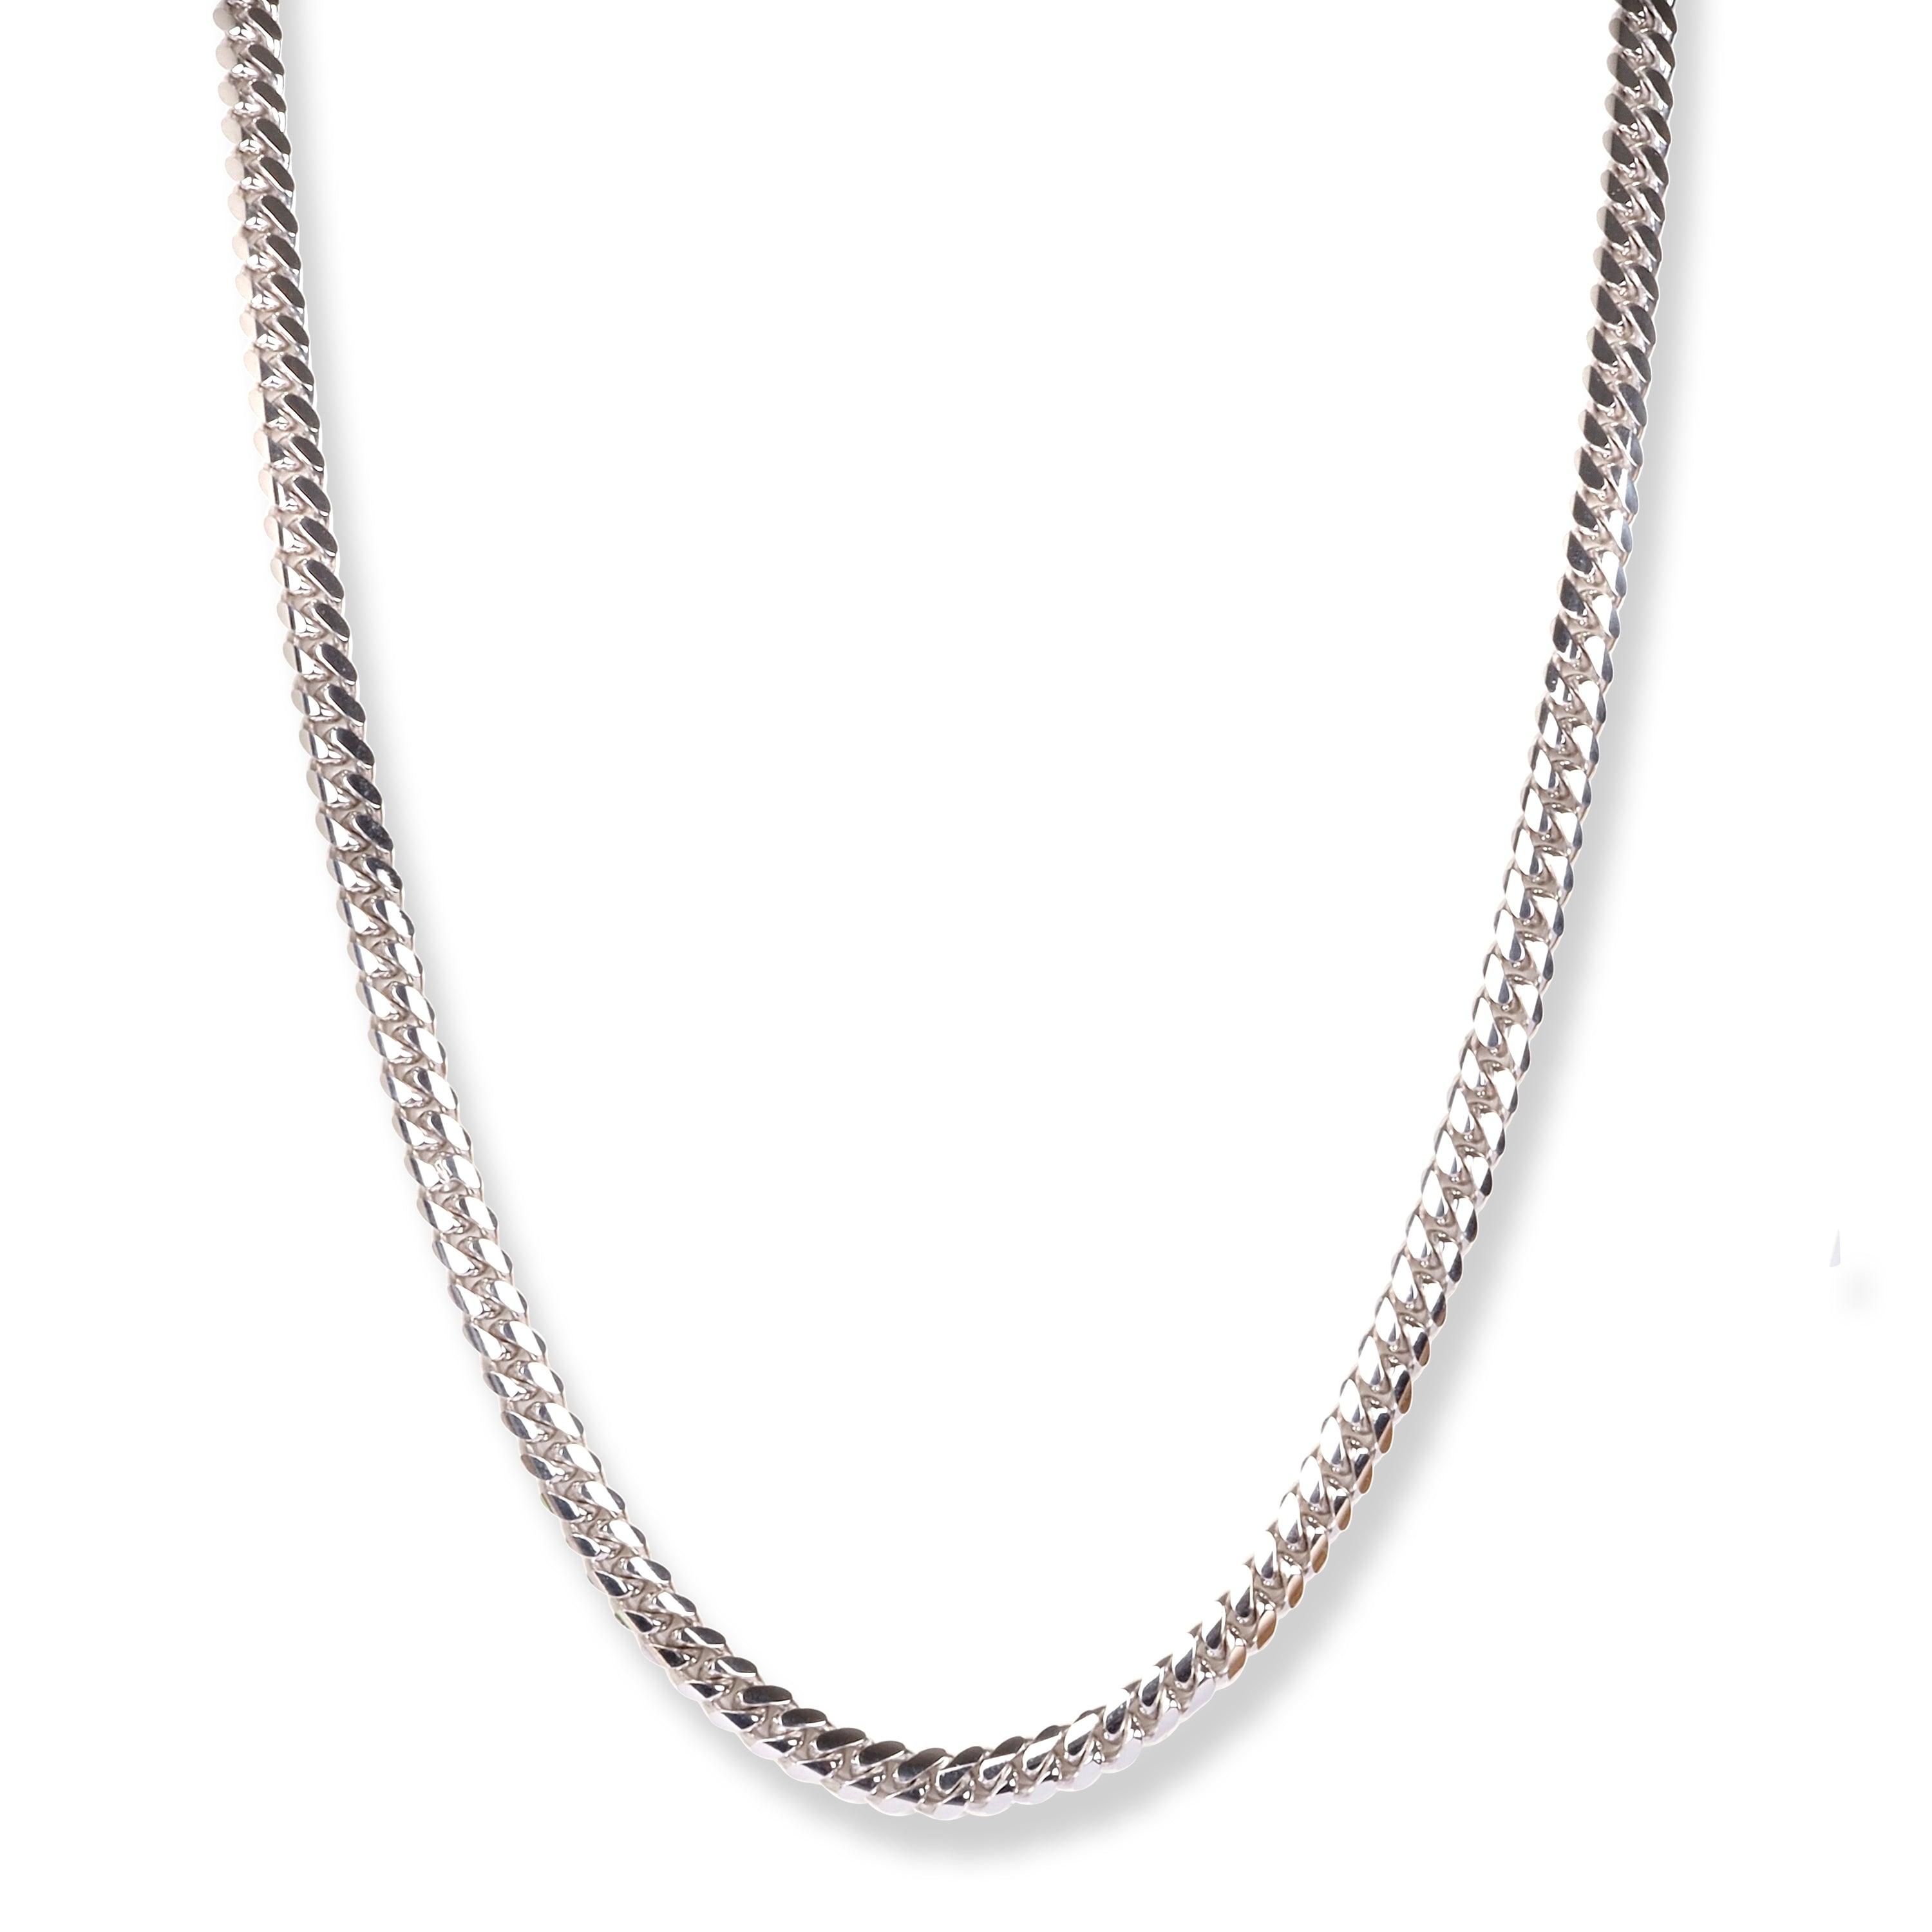 18ct White gold Cuban Link Chain with Open Box Clasp C-3898 - Minar Jewellers